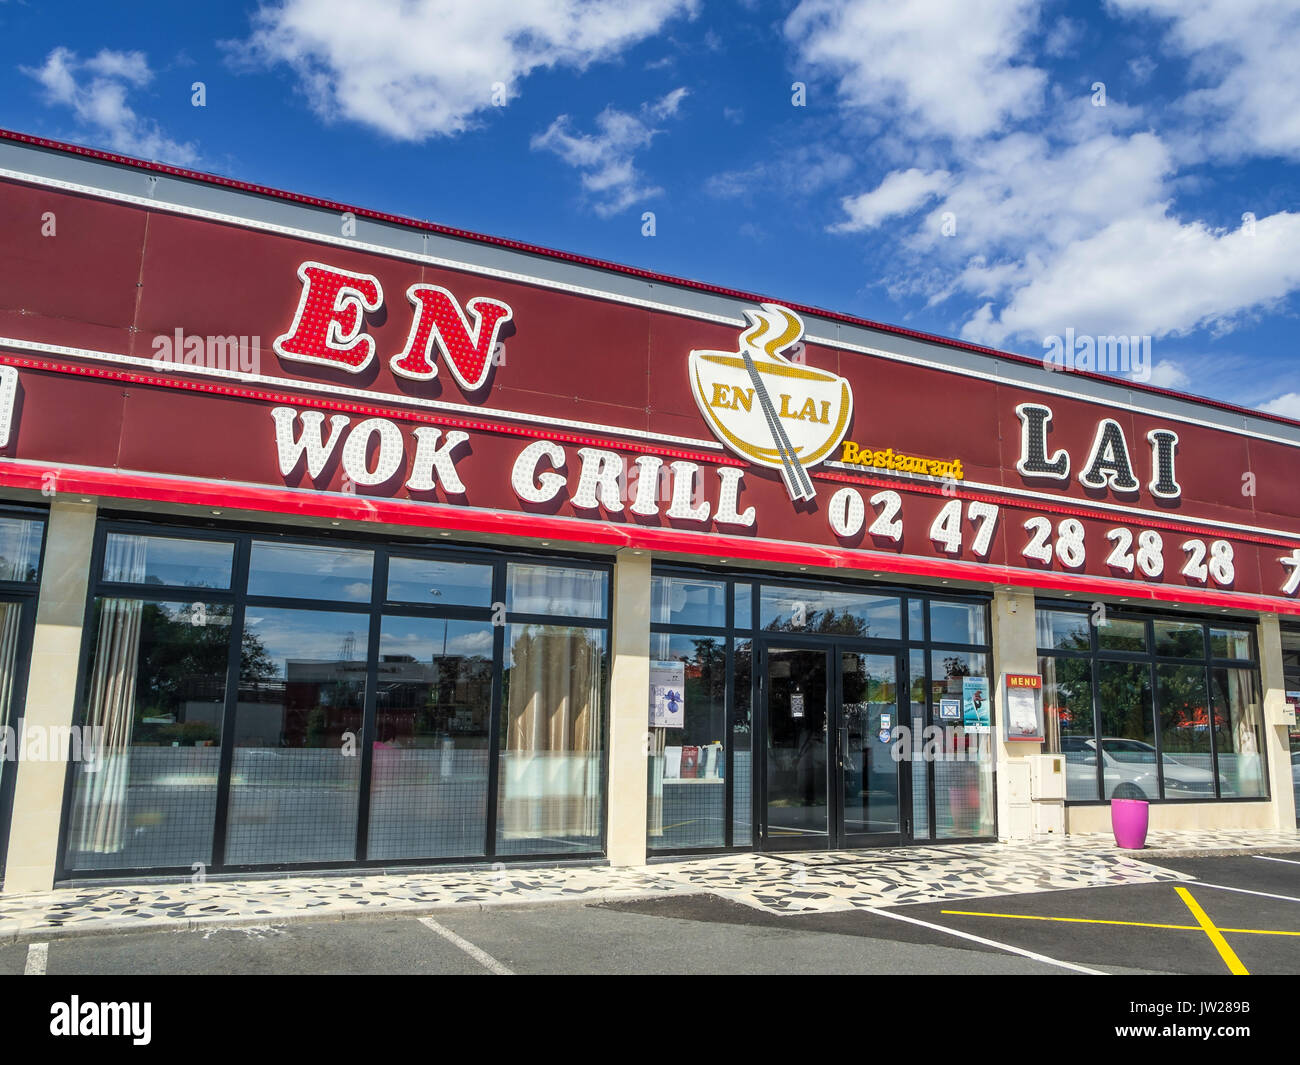 En Lai" Chinese wok grill self-service restaurant, Tours Stock ...